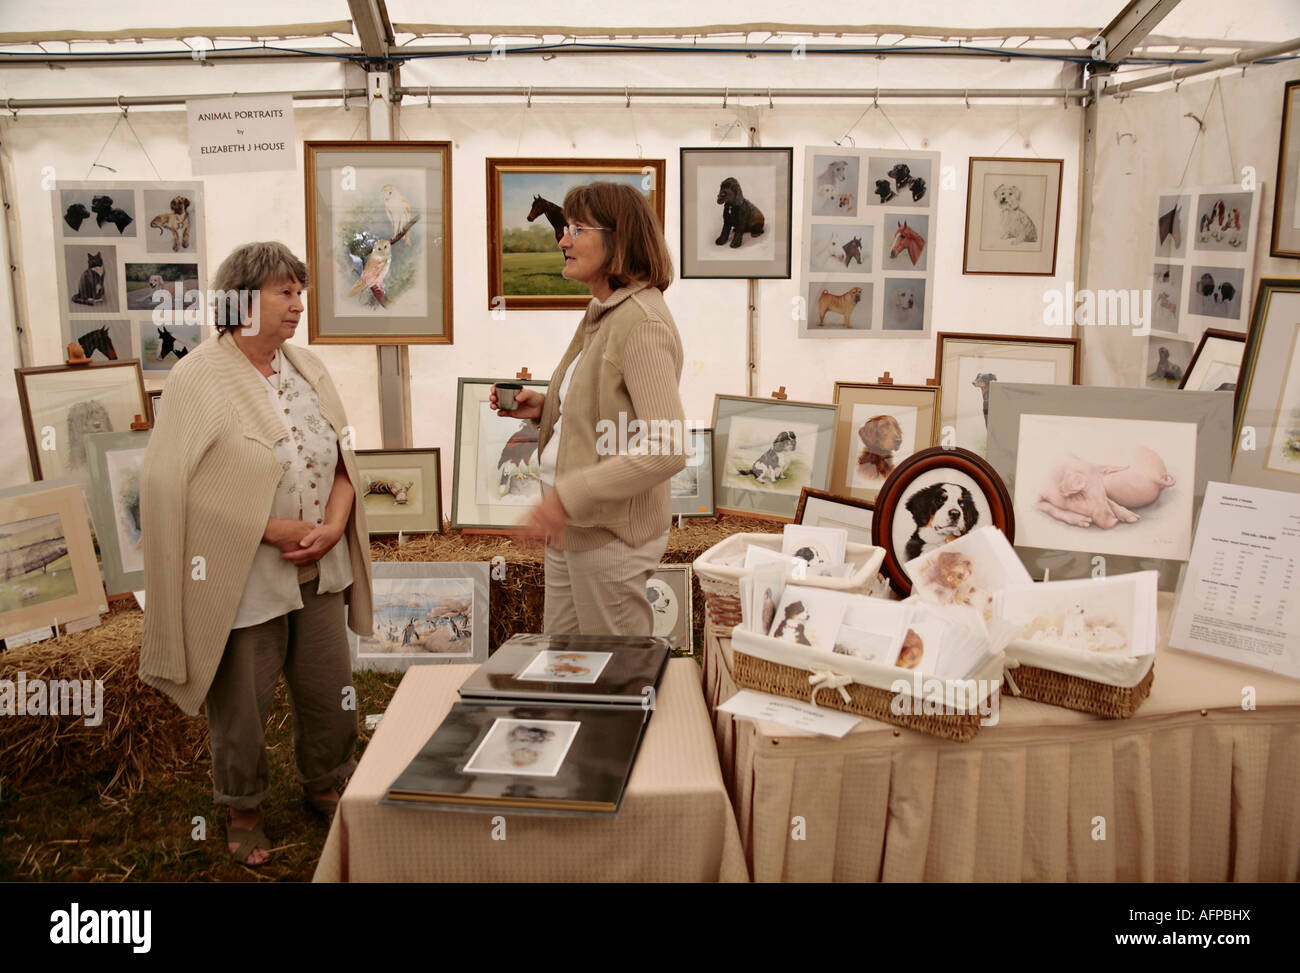 Animal portrait artist talking to a customer at her stand at Craft fair, England, UK Stock Photo